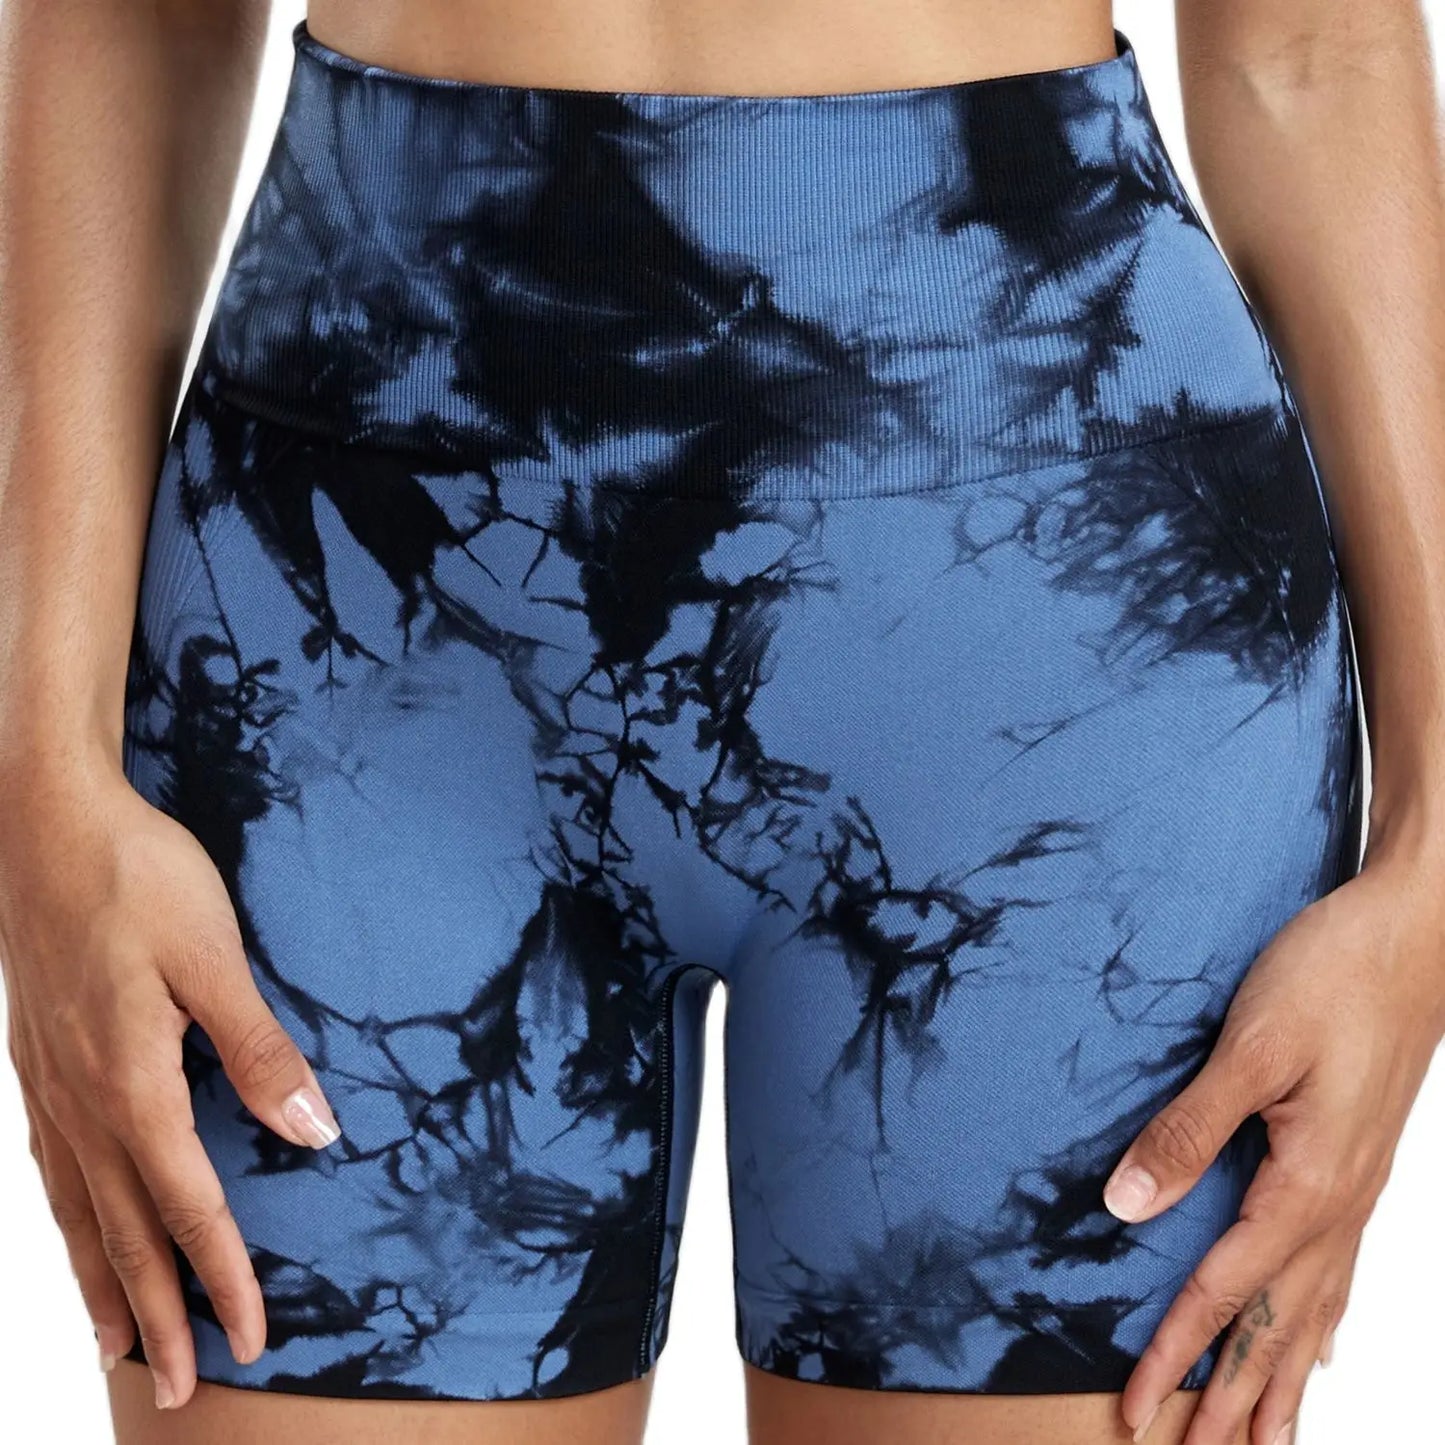 CHRLEISURE Tie Dye Women's Seamless Yoga Shorts: Butt Lifting, High Waist Elastic Sports Leggings for Workout, Cycling, and Sweatpants